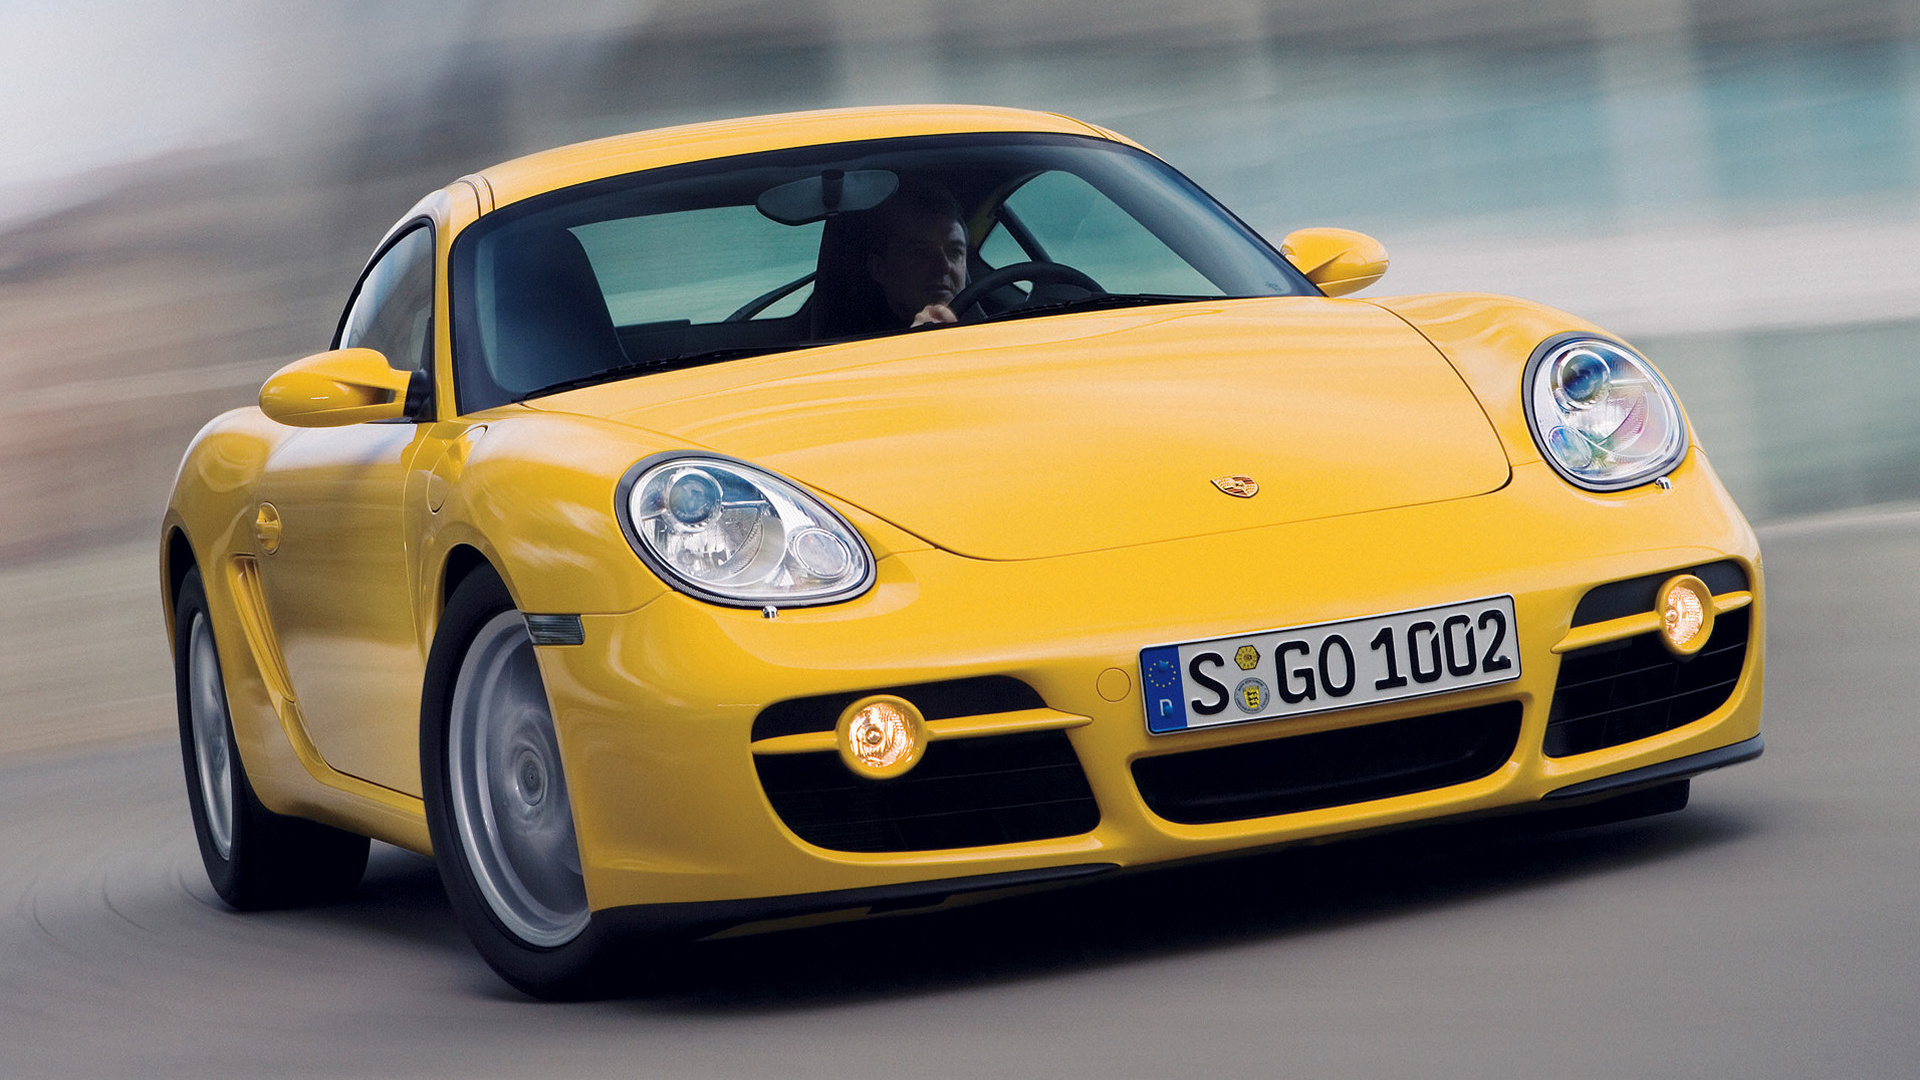 1920x1080 2006 Porsche Cayman Wallpapers and HD Images | Car Pixel